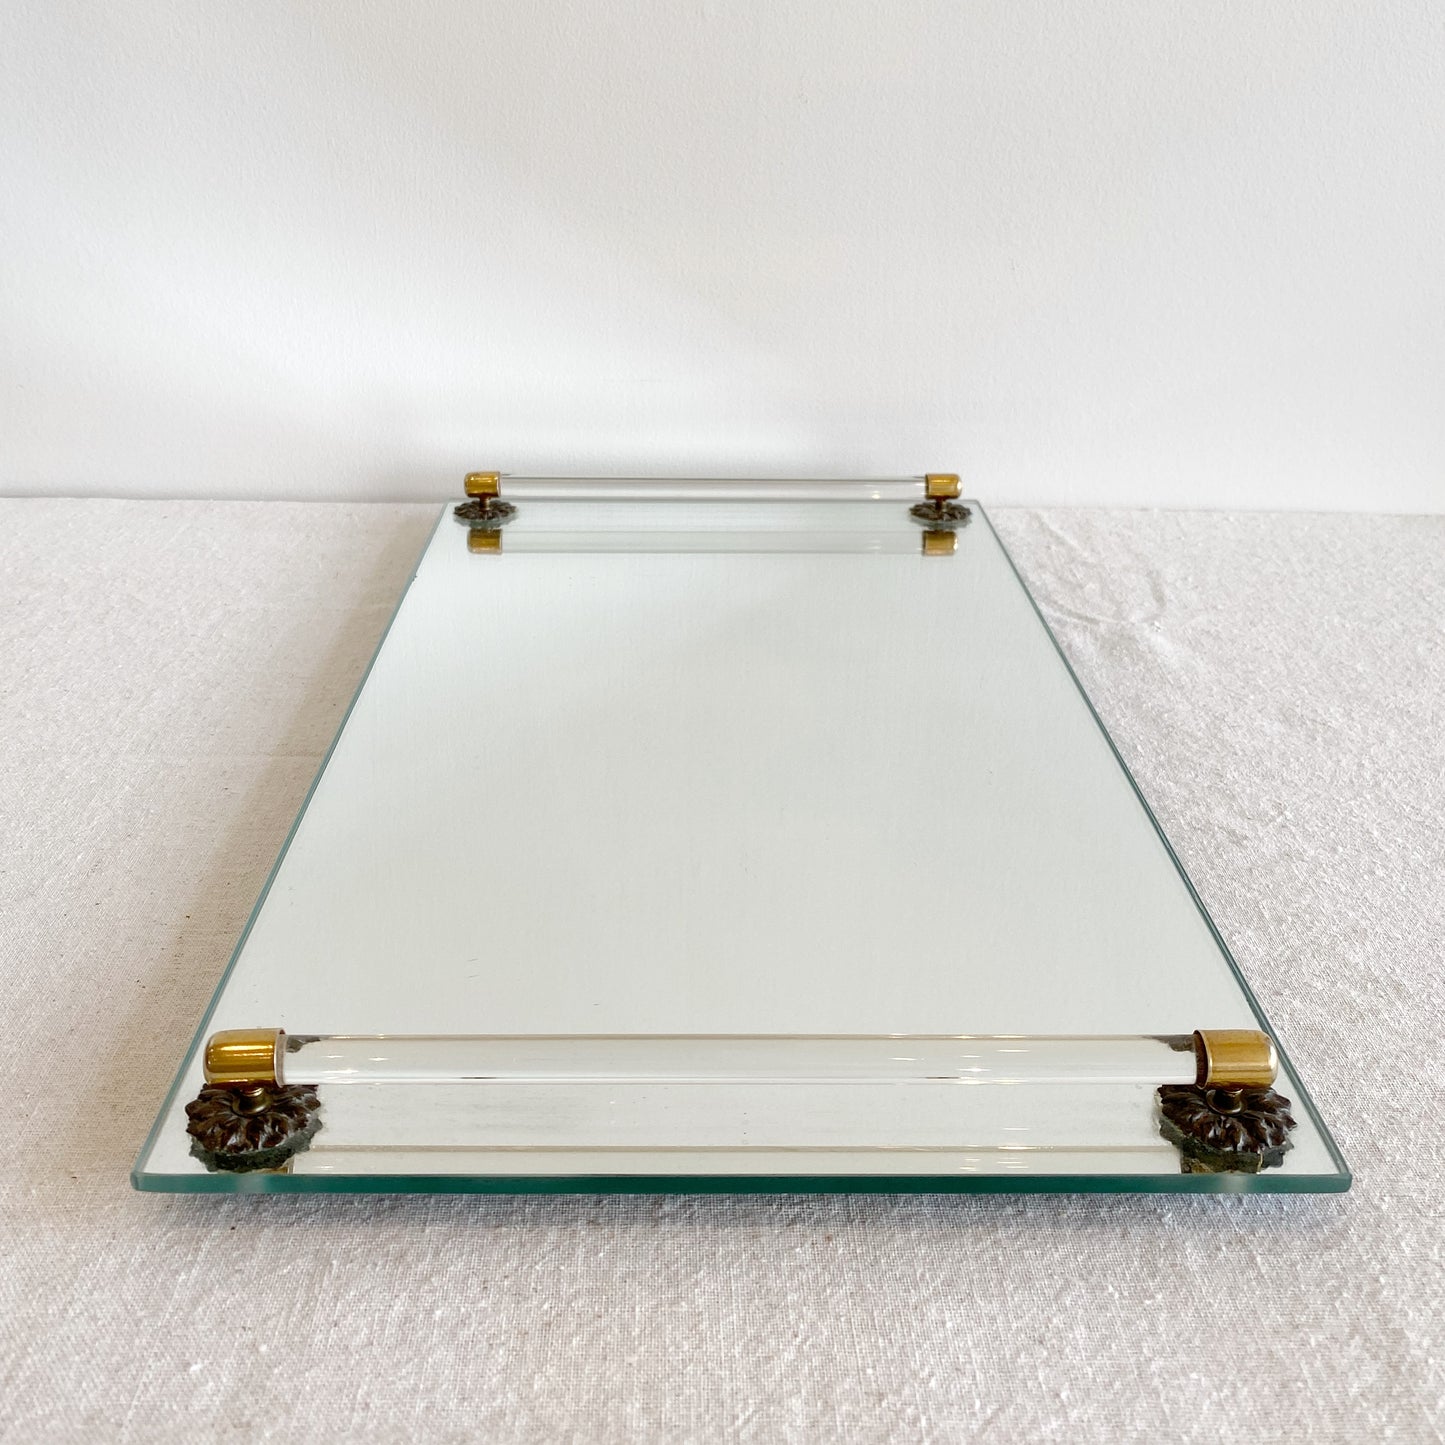 Vintage Mirror Dresser Tray with Glass Handles